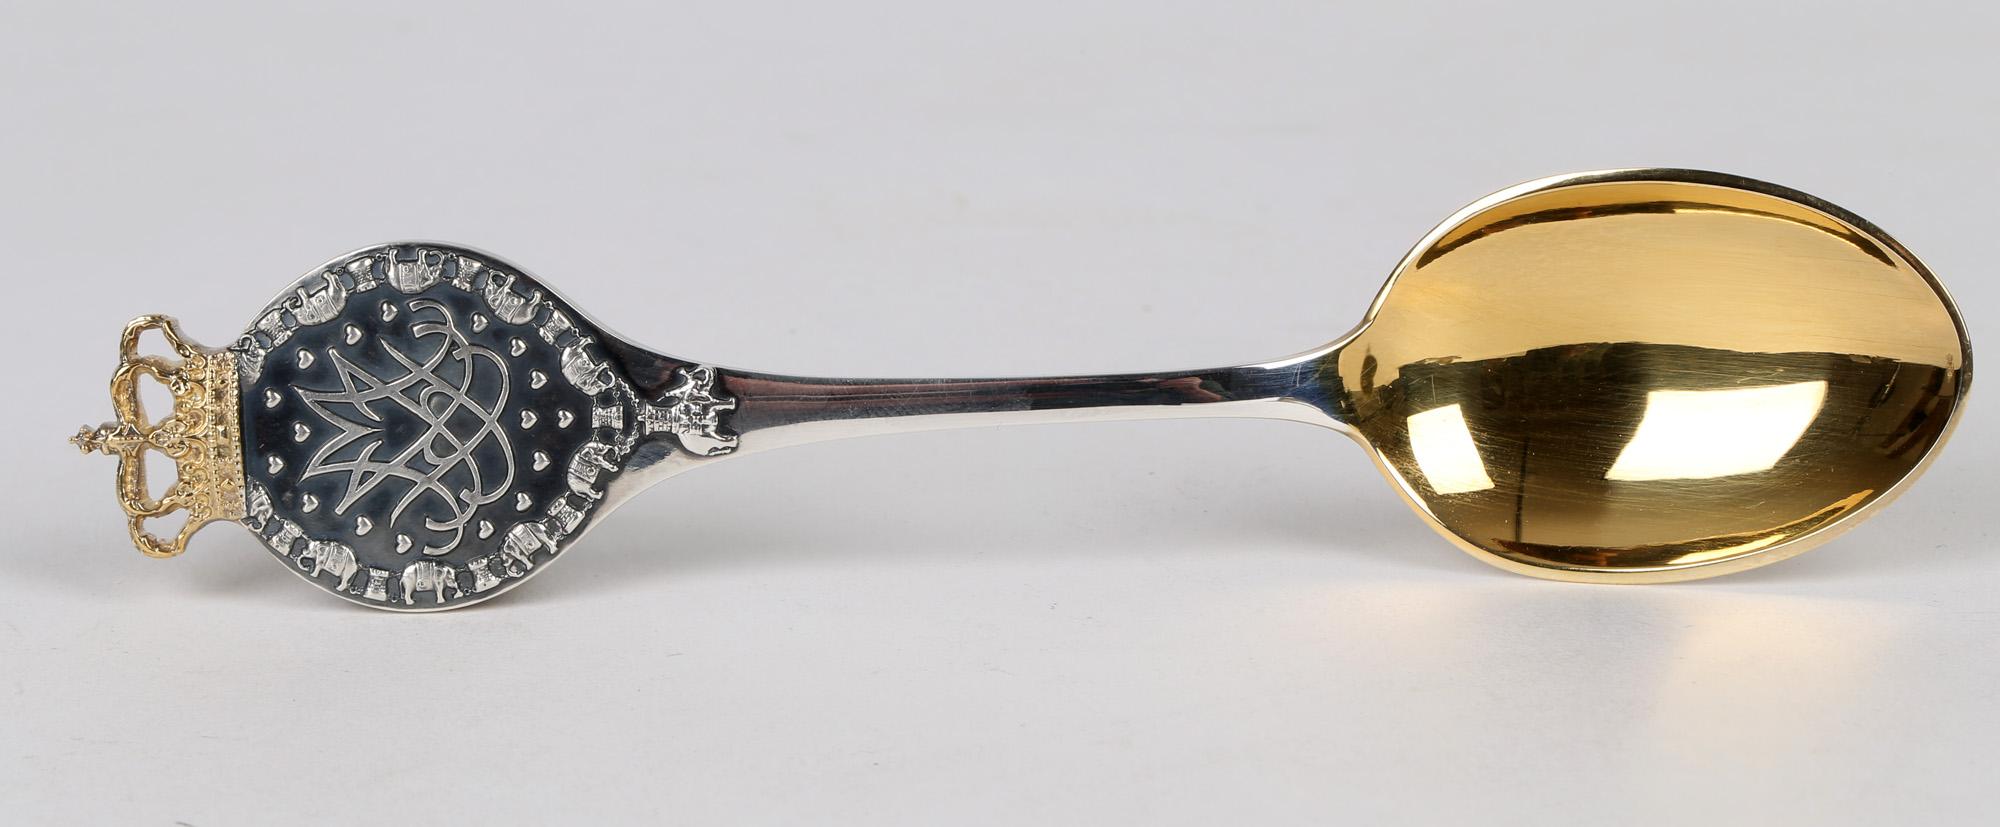 A very fine Danish Peter Hertz original boxed gilded silver spoon commemorating the silver wedding of Queen Margreth and Prince Henrik on 10th June 1992. The heavily made spoon has a rounded terminal relief moulded with a central monogram surrounded